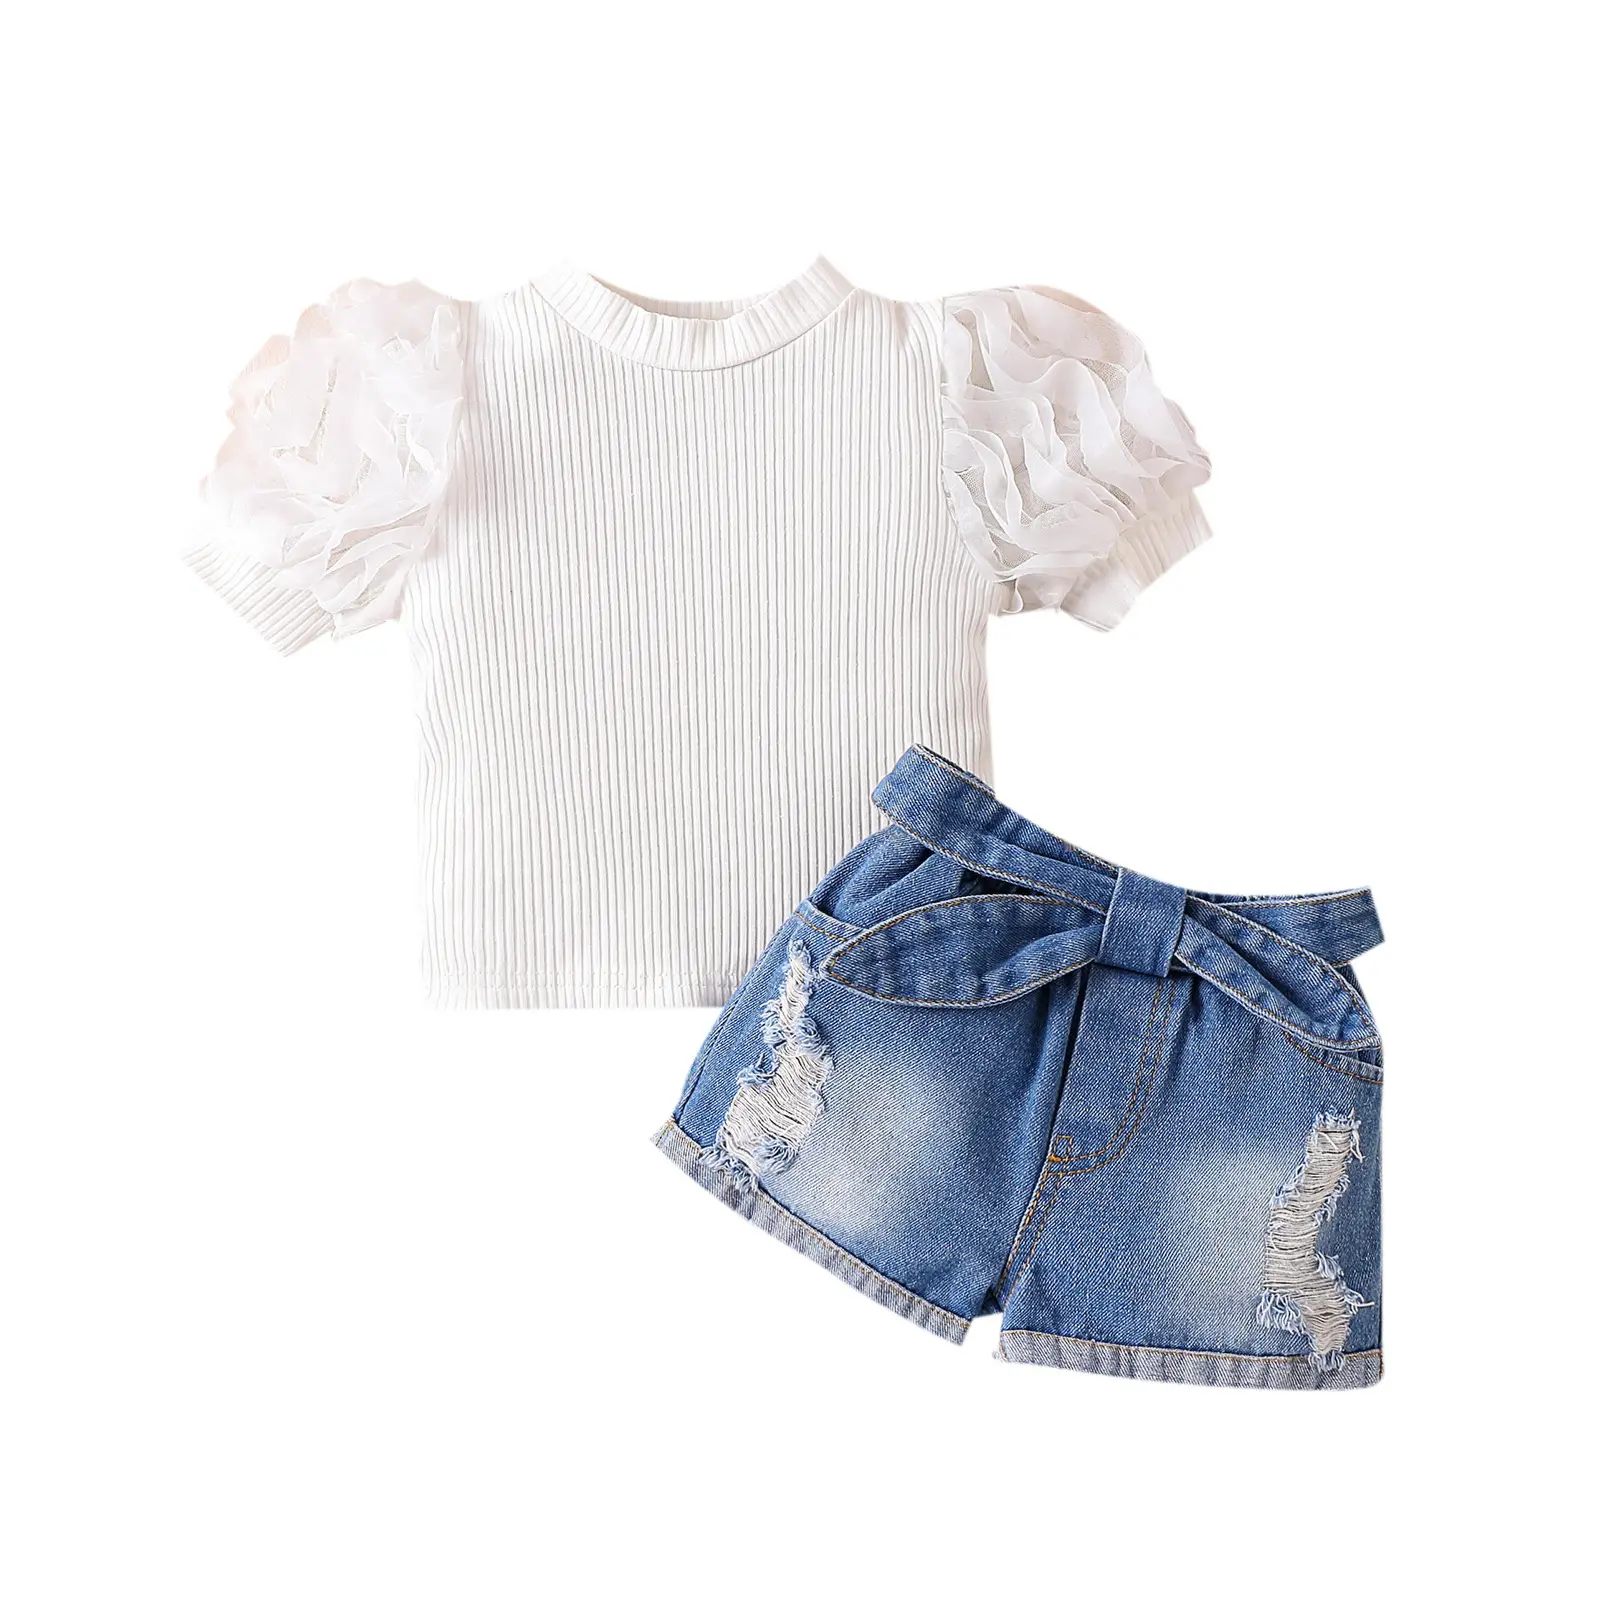 Custom Brand Summer Girls outfit Kids New Lace Bubble Sleeves tops Shirts+Ripped Denim Shorts Sets